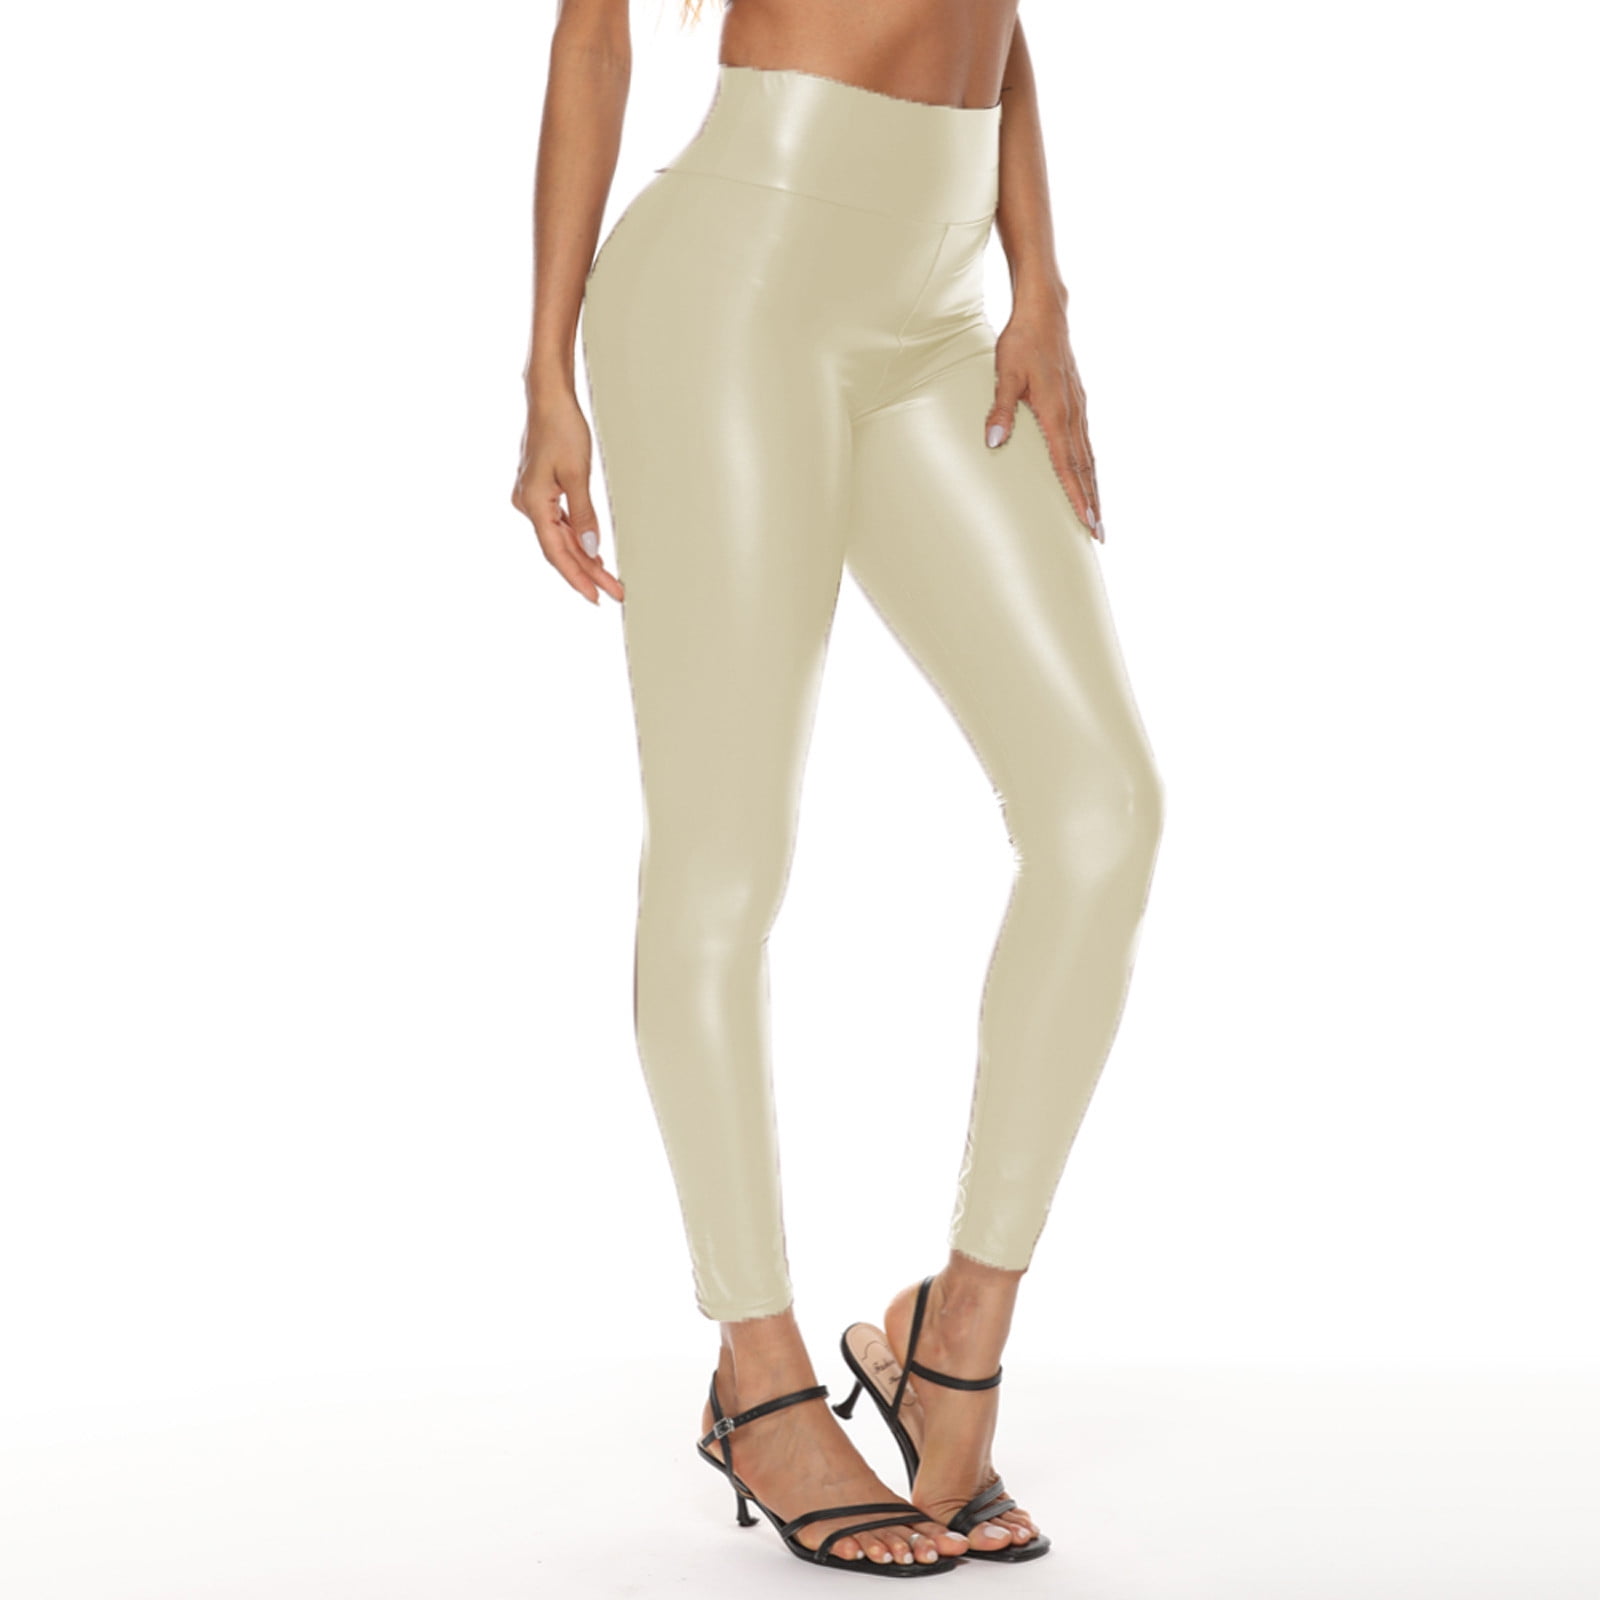 Beige jeggings pants & trousers for women casual and office wear.